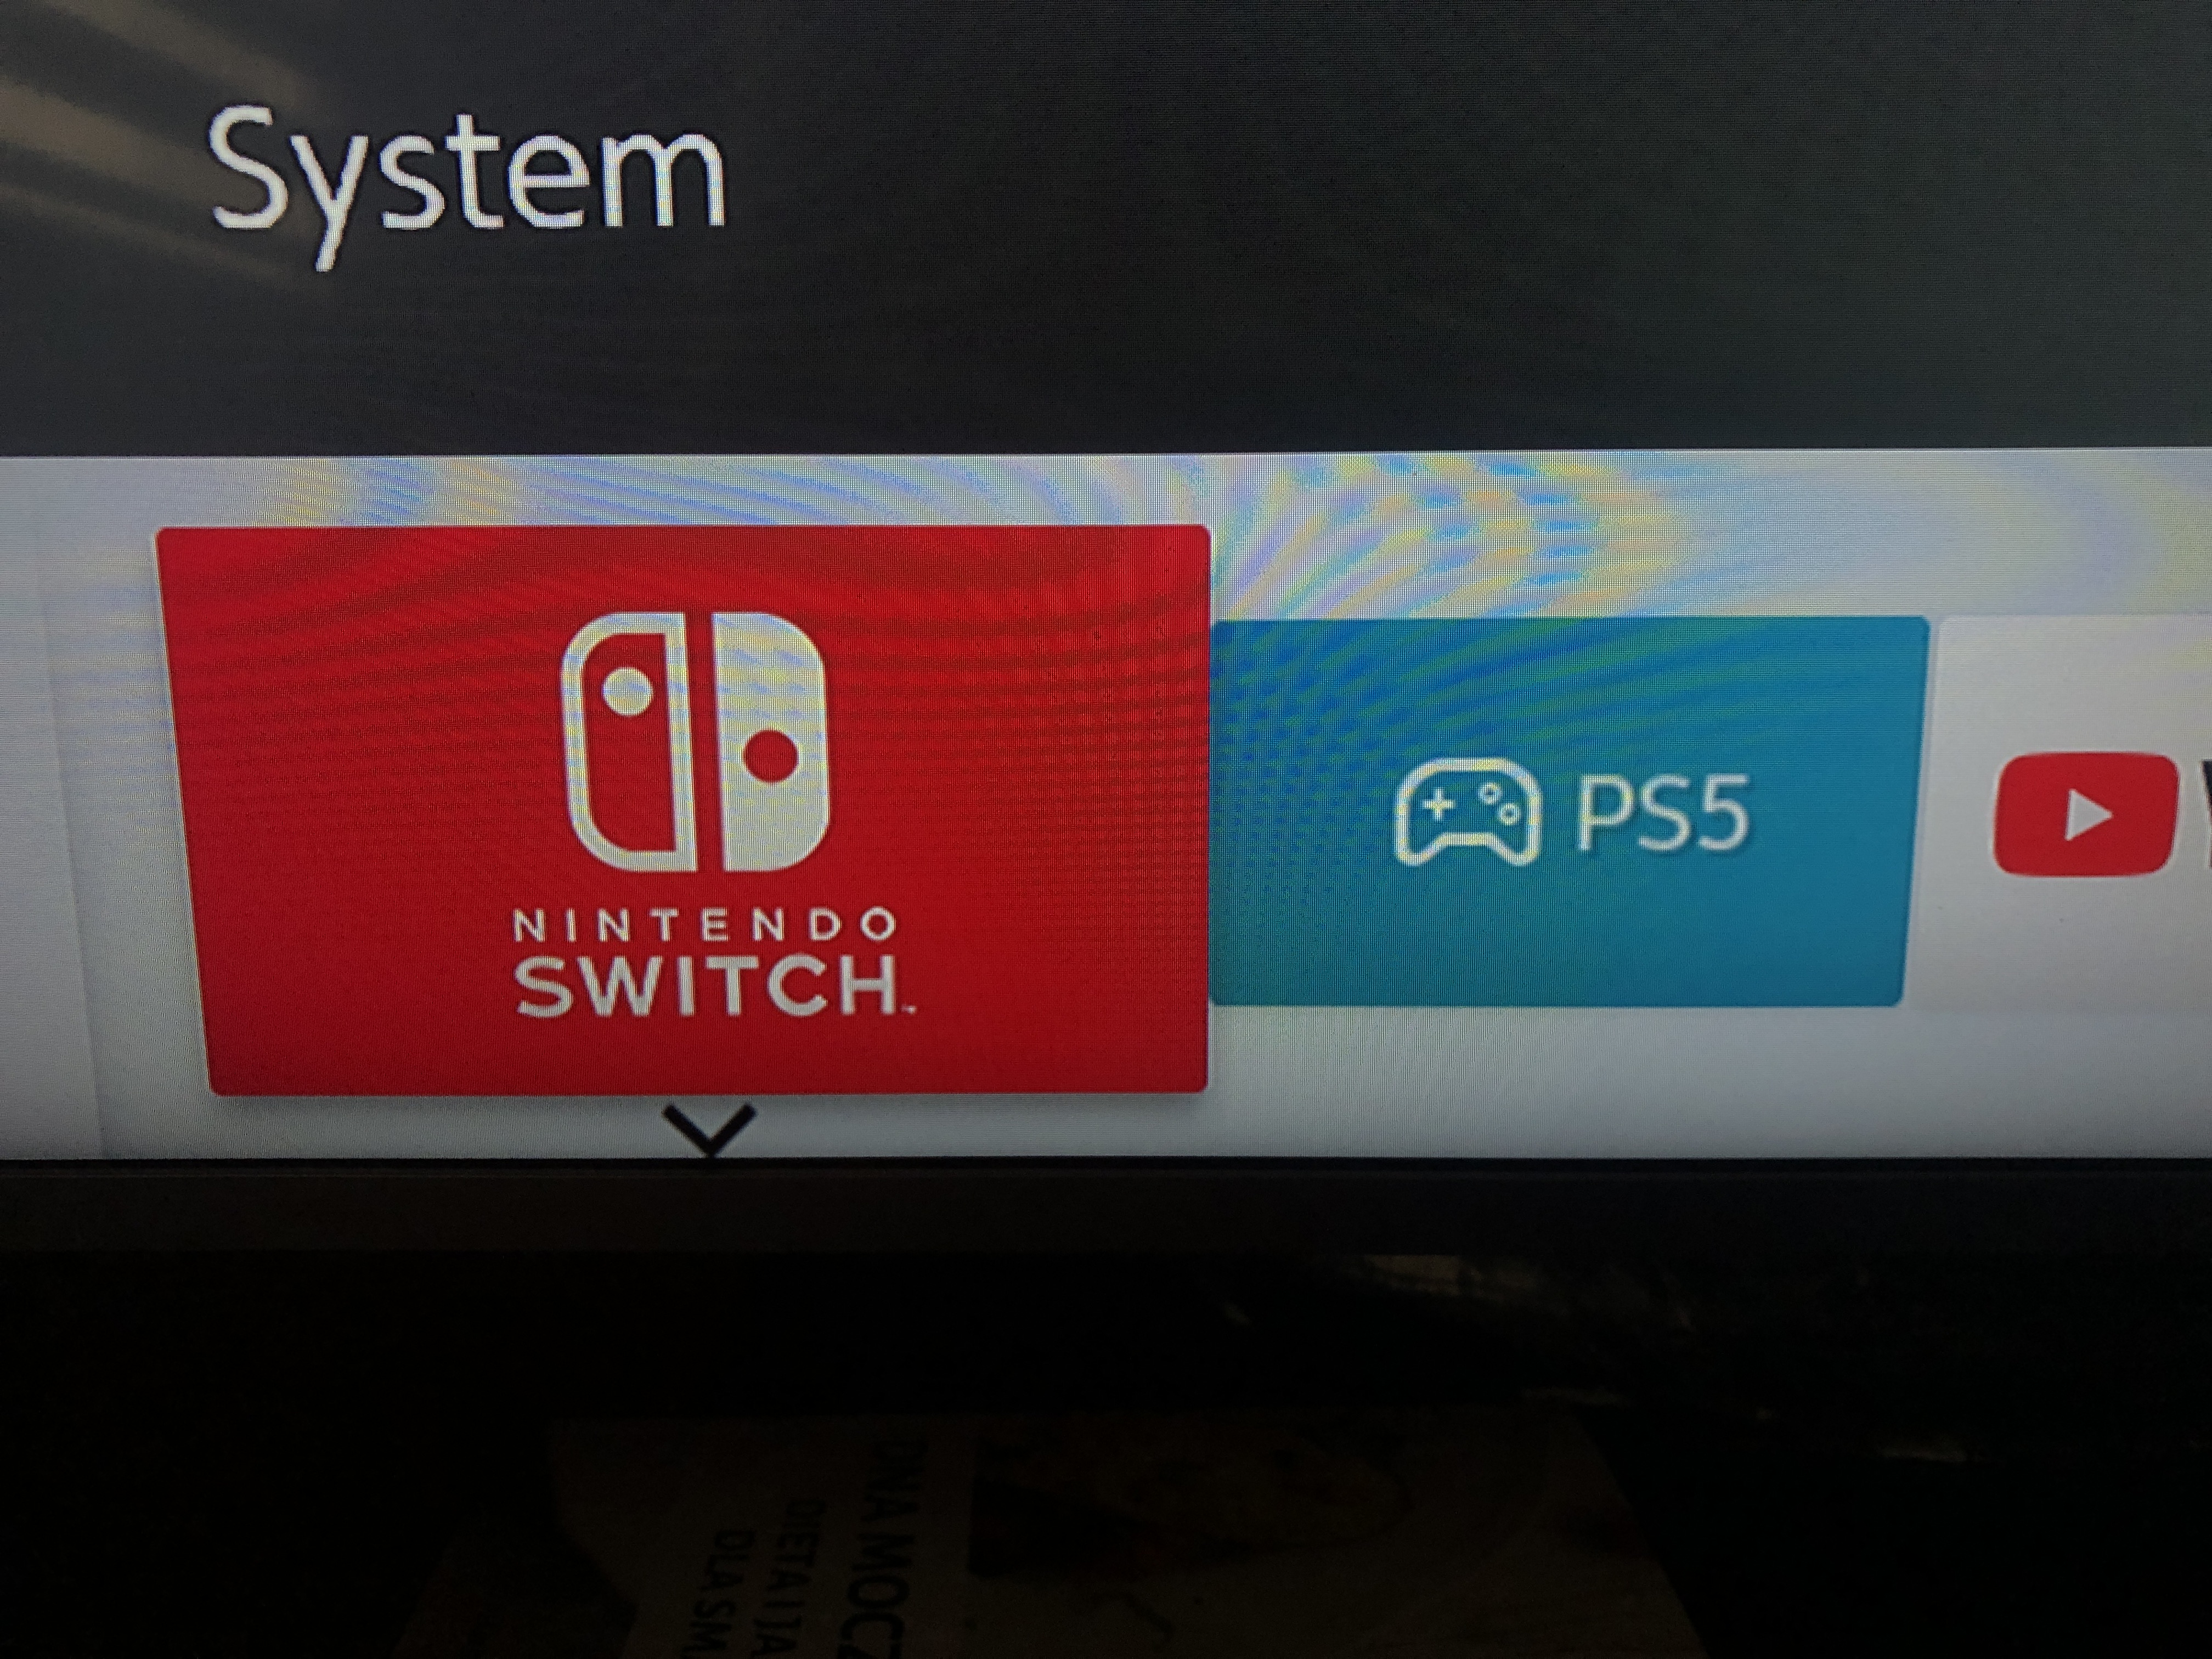 Solved: Q60R QLED (55 inch) flicker with Nintendo Switch - Page 4 - Samsung  Community